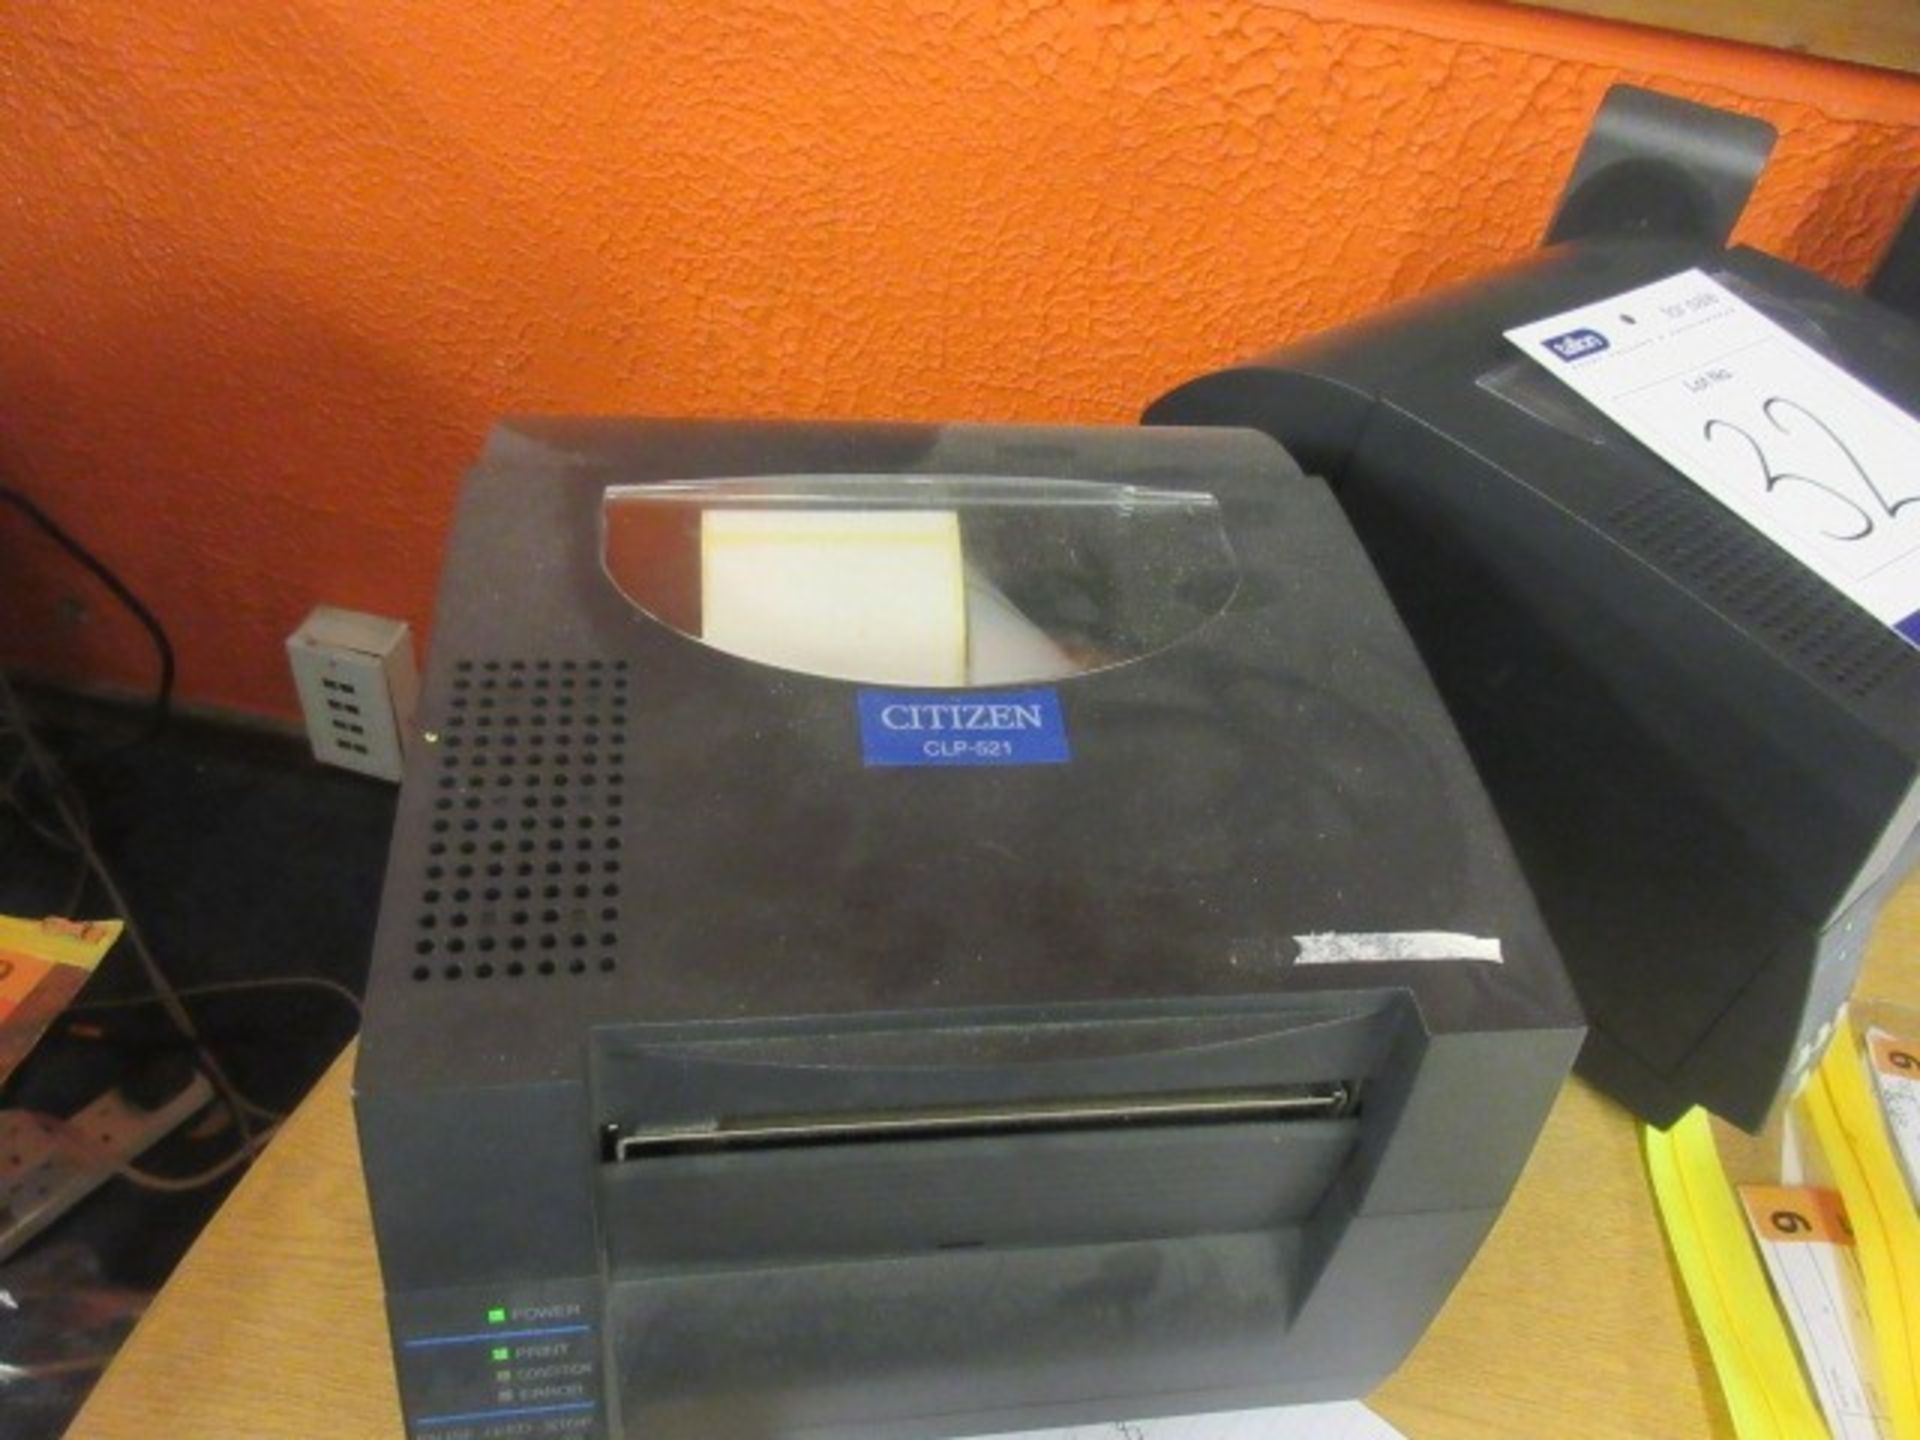 Citizen CLP-521 thermal label printer. - Image 3 of 4